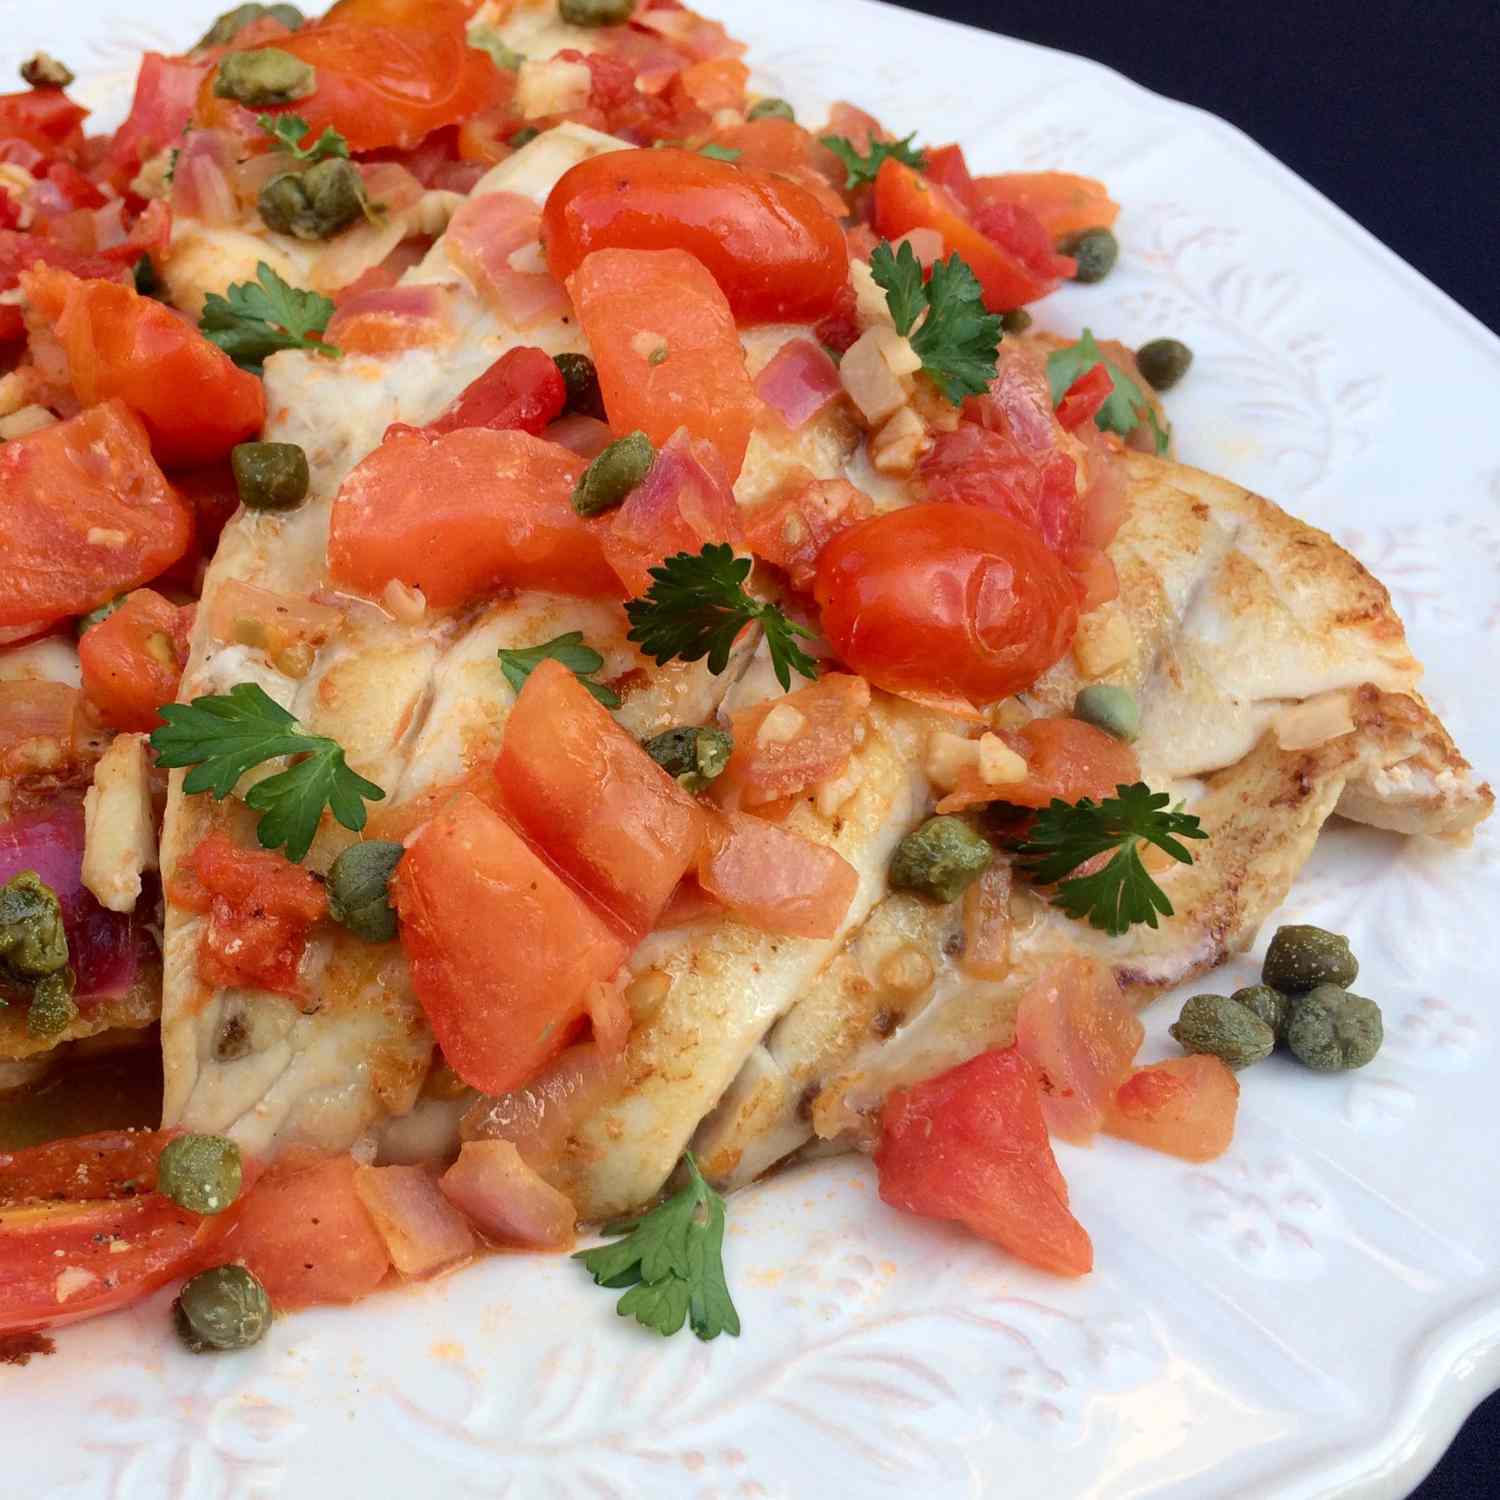 Skillet-Braised Grouper with Tomatoes, Onions, and Capers